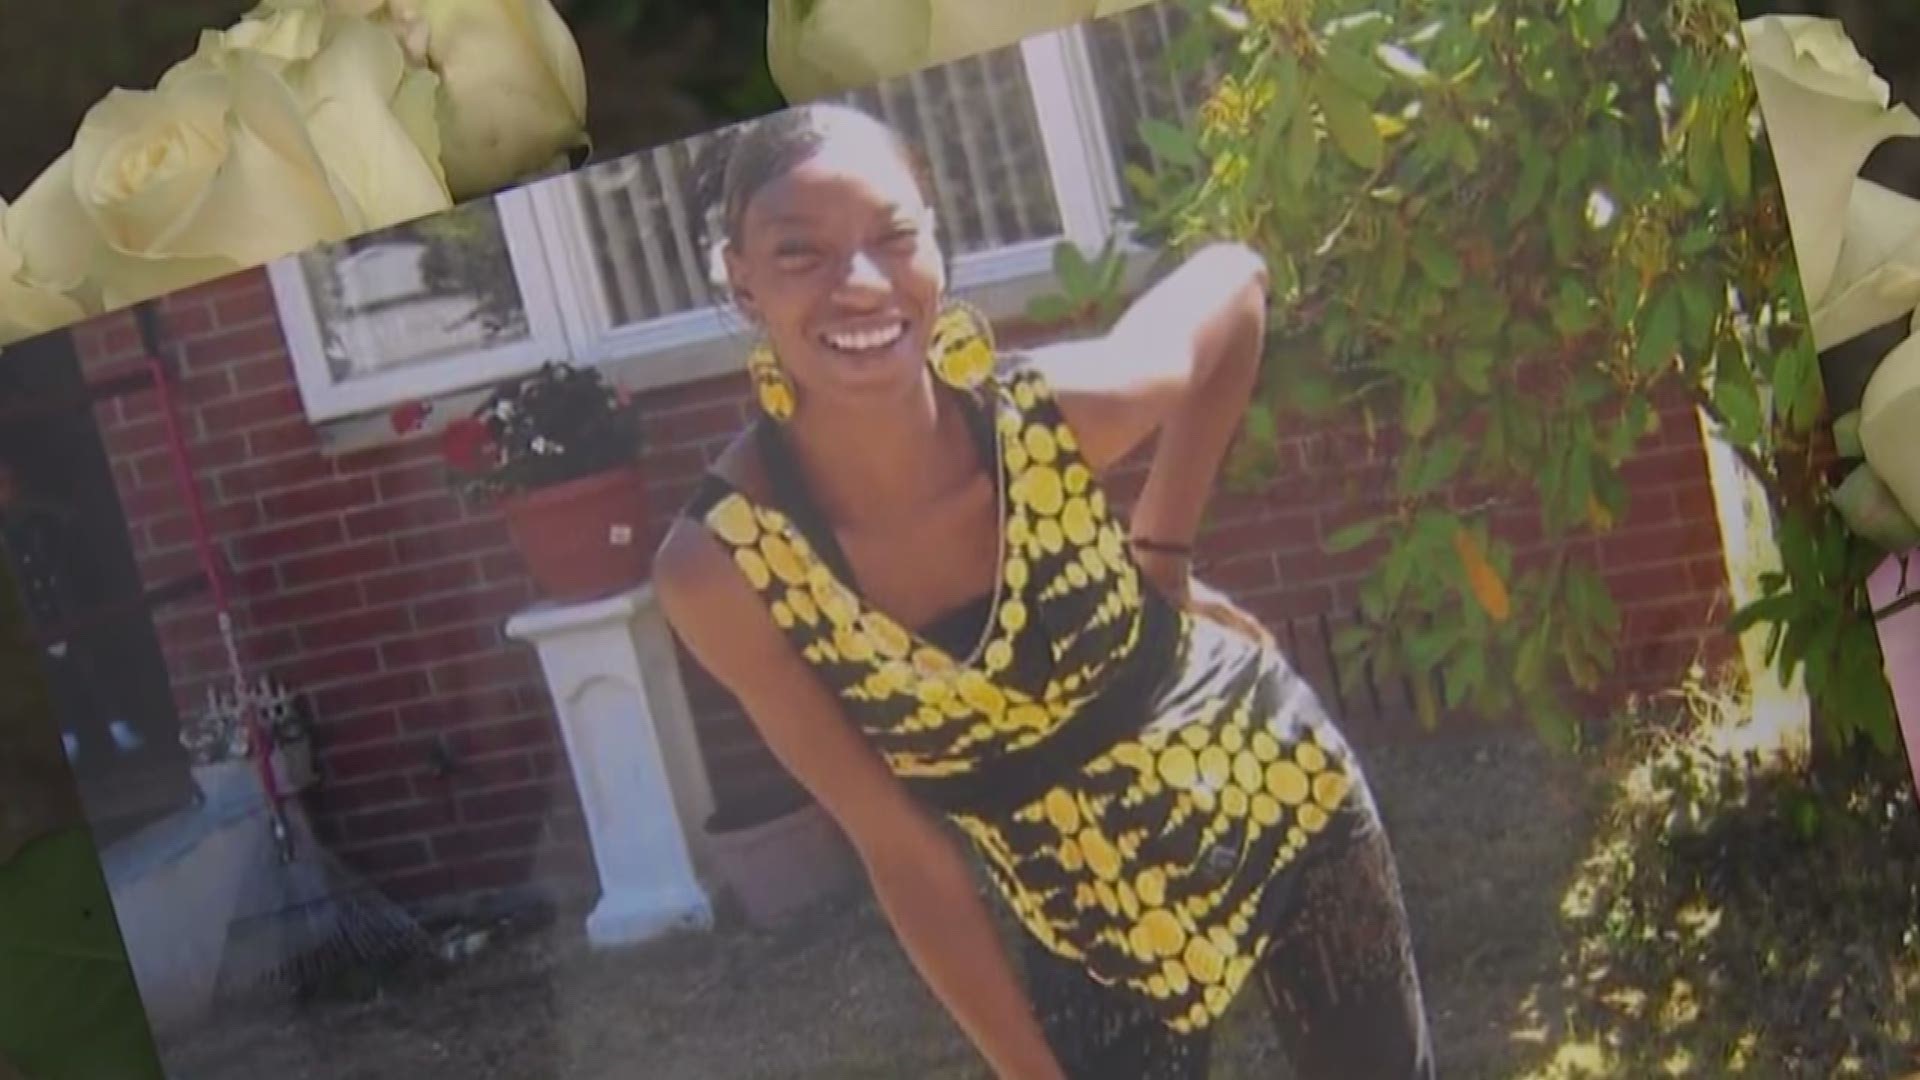 A mother of three was shot and killed by officers over the weekend.The police department has been very deliberate in the information it has released so far. Community groups are demanding answers.